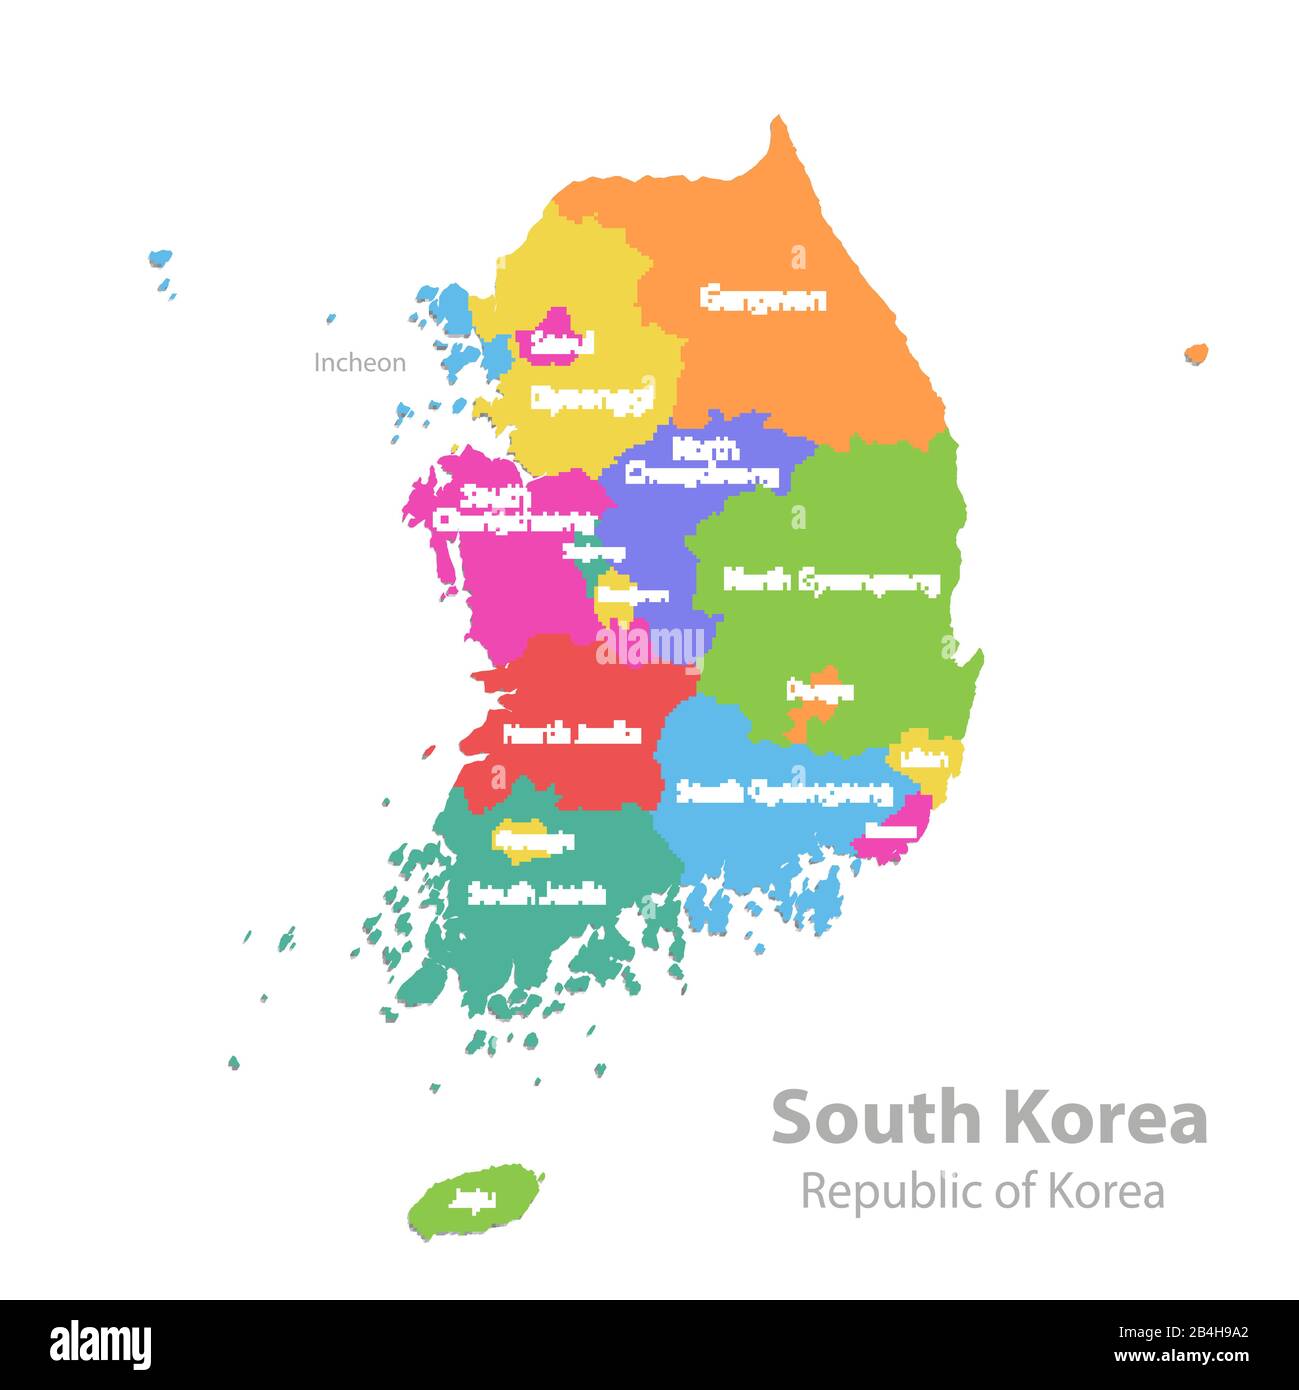 South Korea map, Republic of Korea, administrative division with state names, color map isolated on white background vector Stock Vector